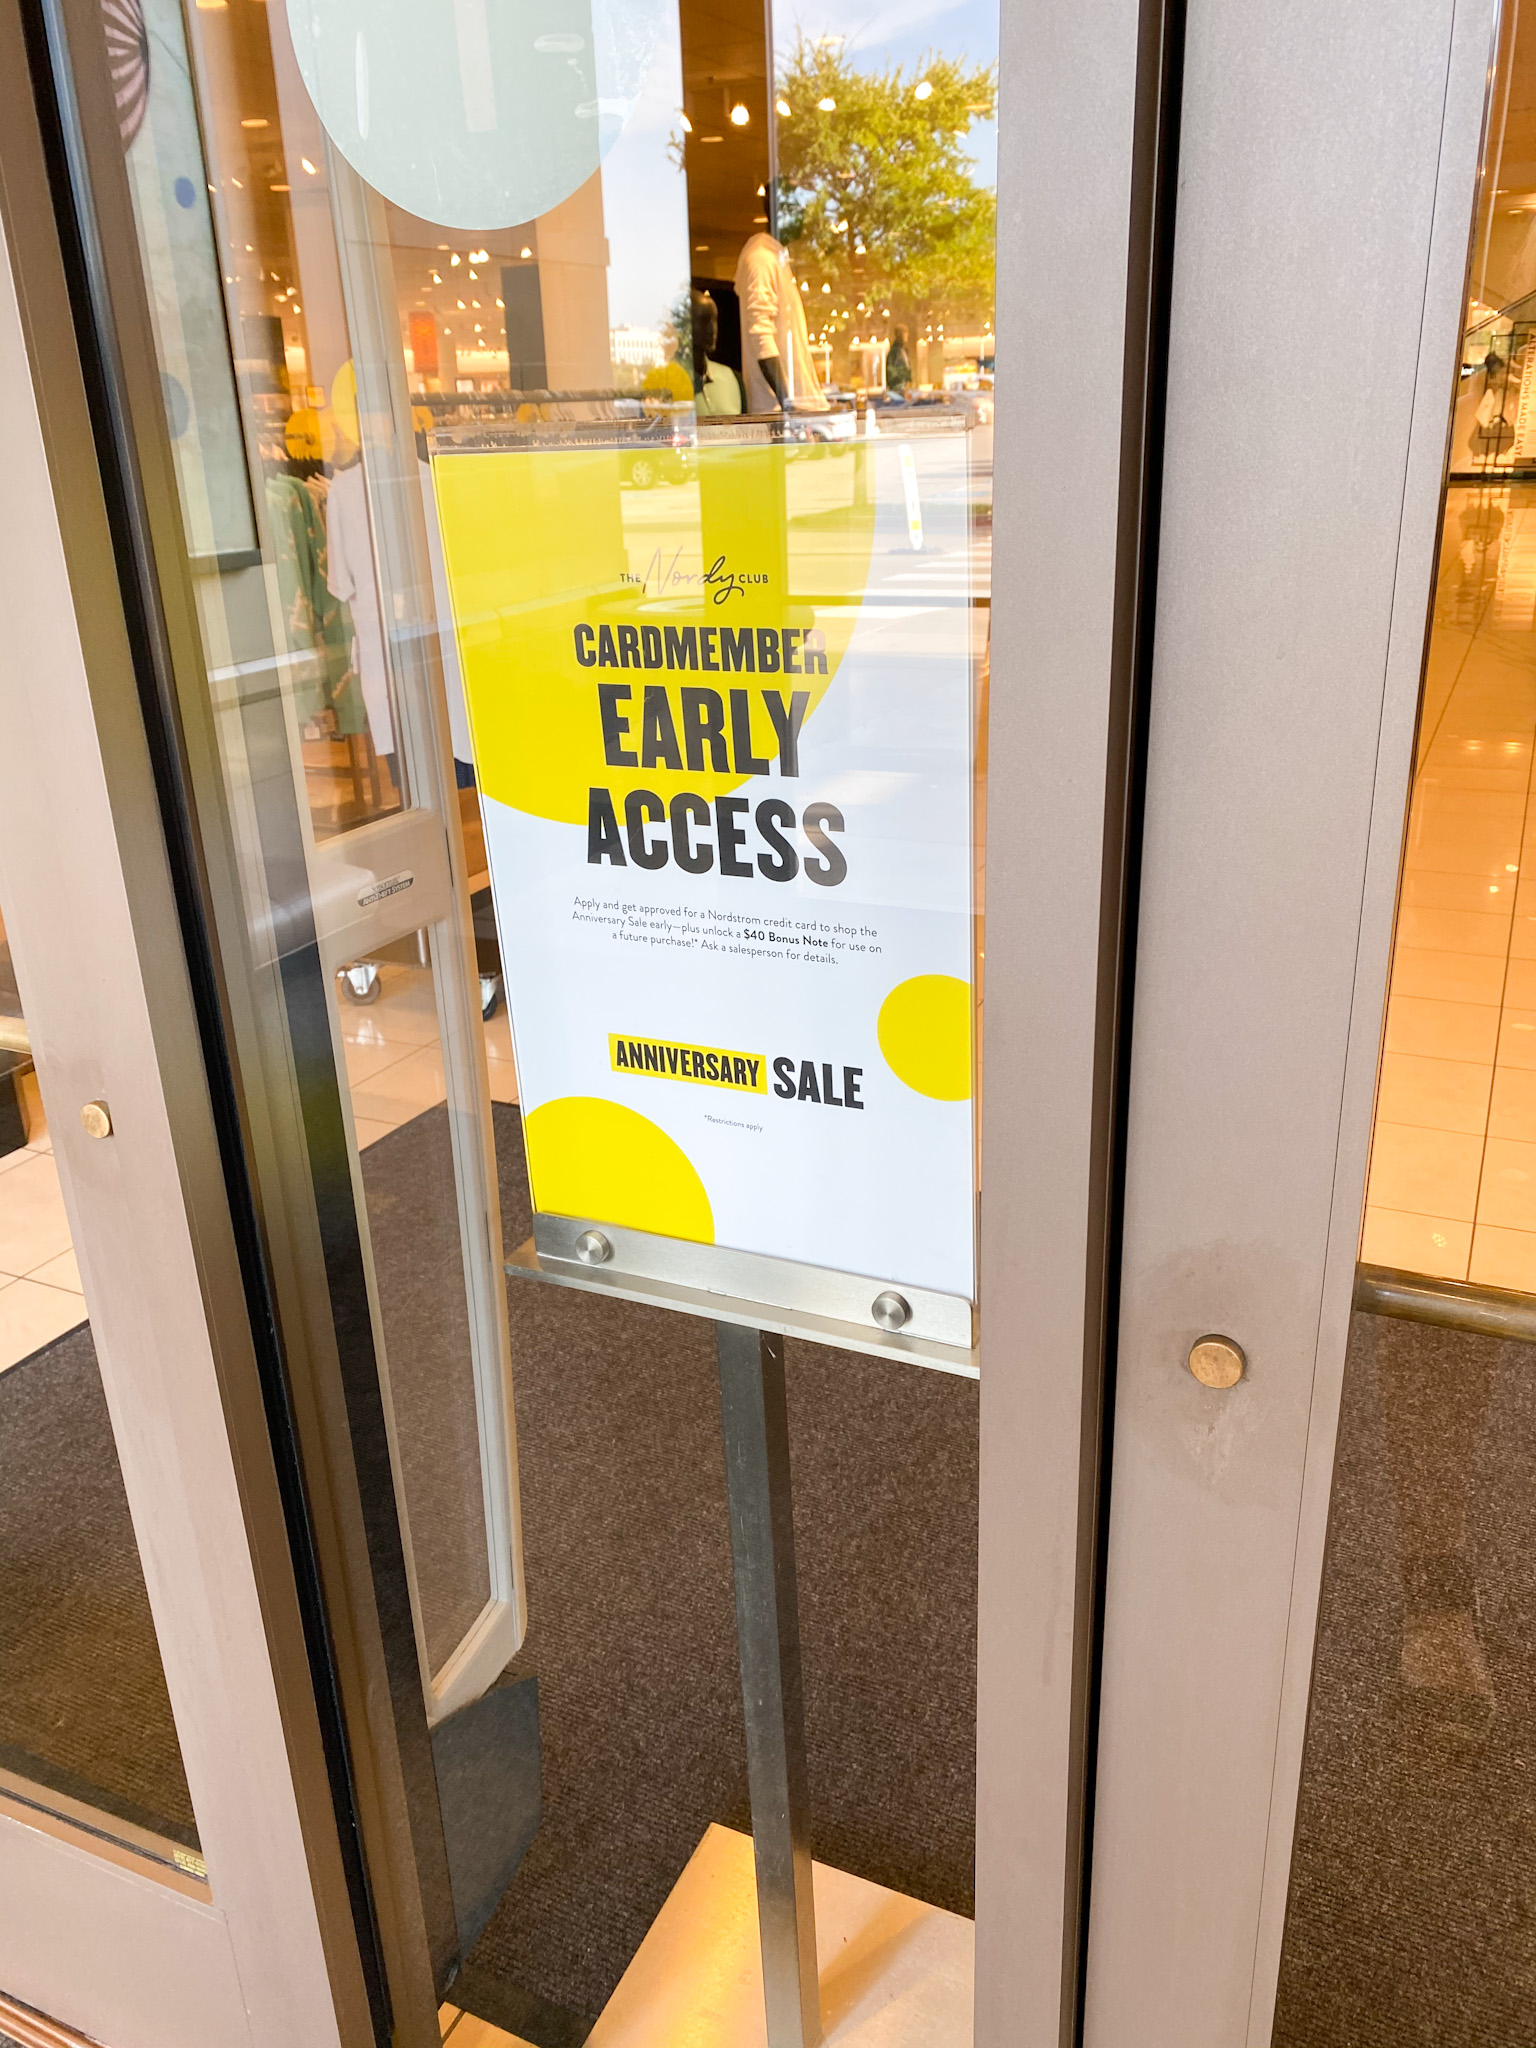 Nordstrom Anniversary Sale Cardmember Early Access sign 